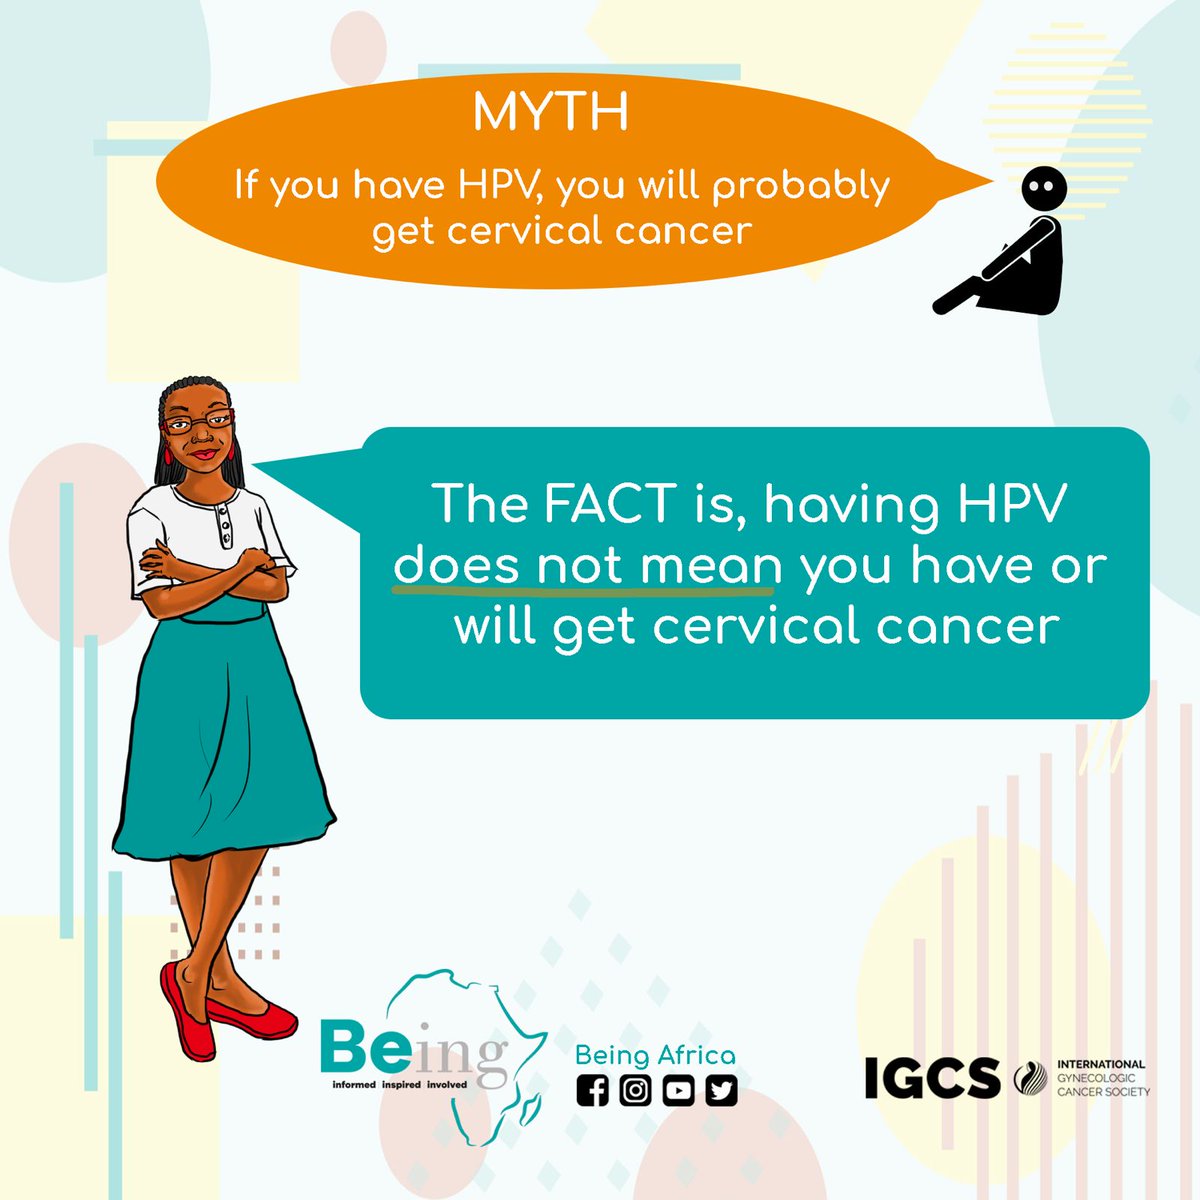 #DYK: There are over 100 strains of HPV, but types 16 and 18 are the main culprits behind #cervicalcancer. Understanding the risks empowers women to prioritize their health. Protect her future with awareness and vaccination. #HerReasonForBeing
 
➡️ Get Informed 
➡️ Get Vaccinated